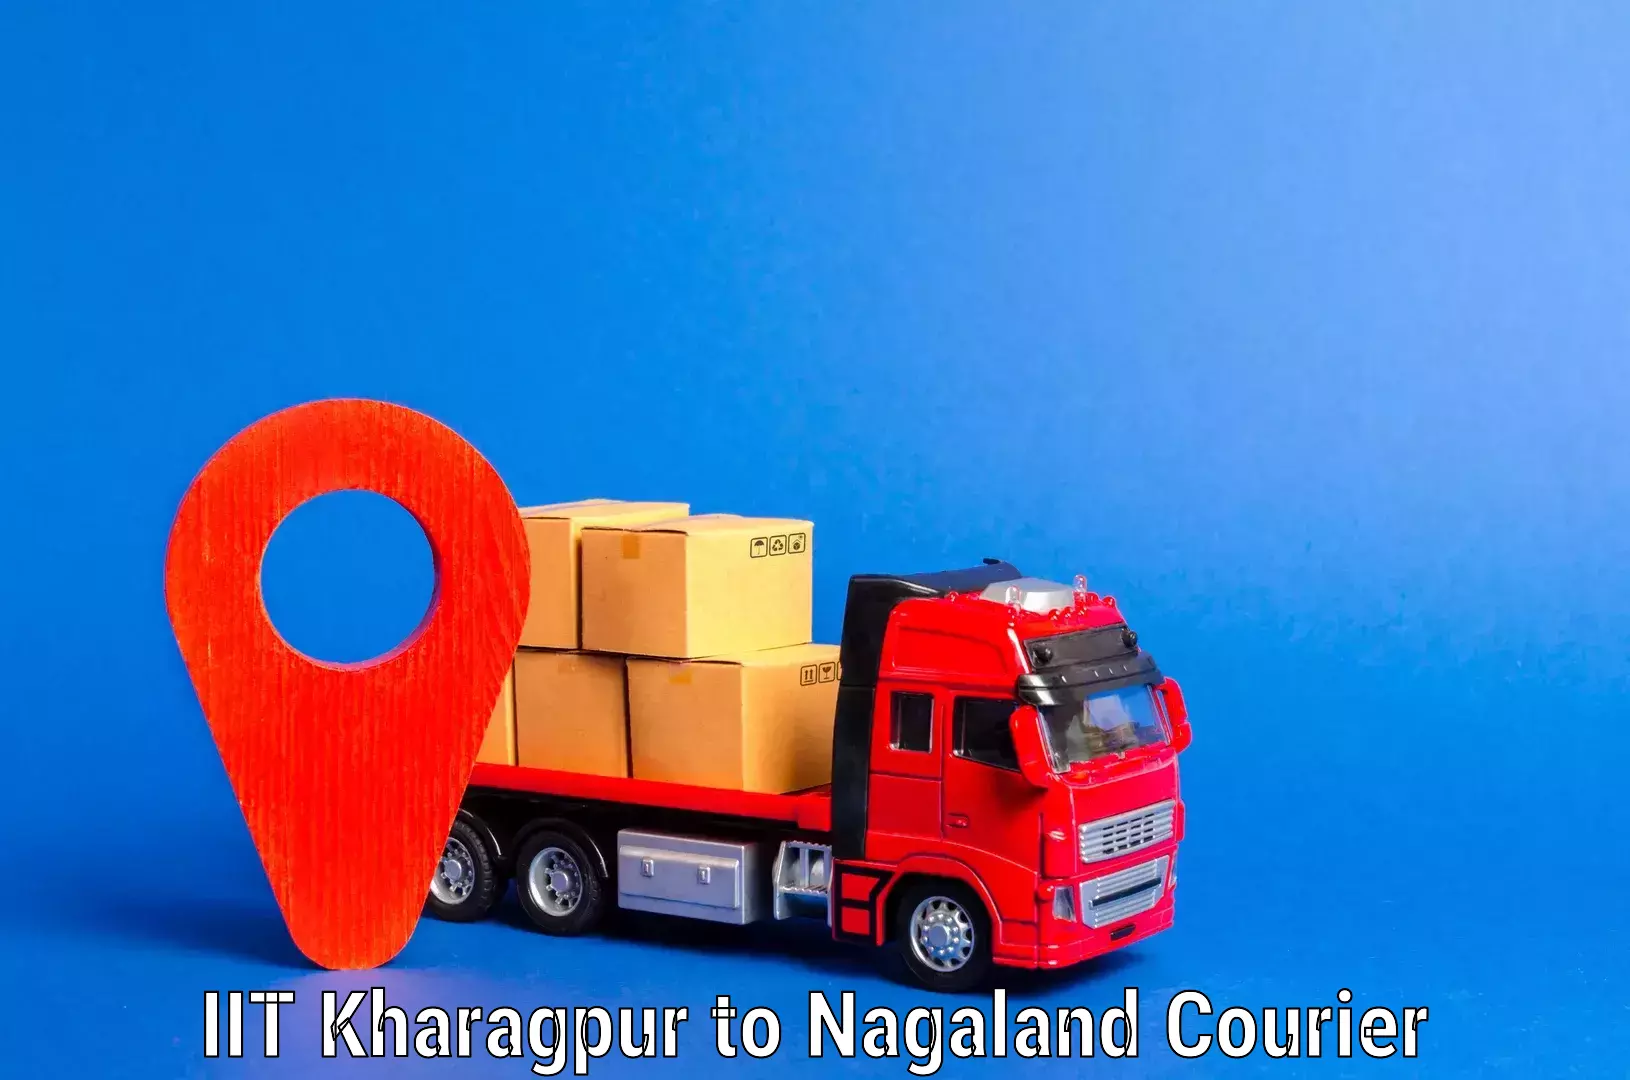 Furniture transport specialists IIT Kharagpur to Nagaland